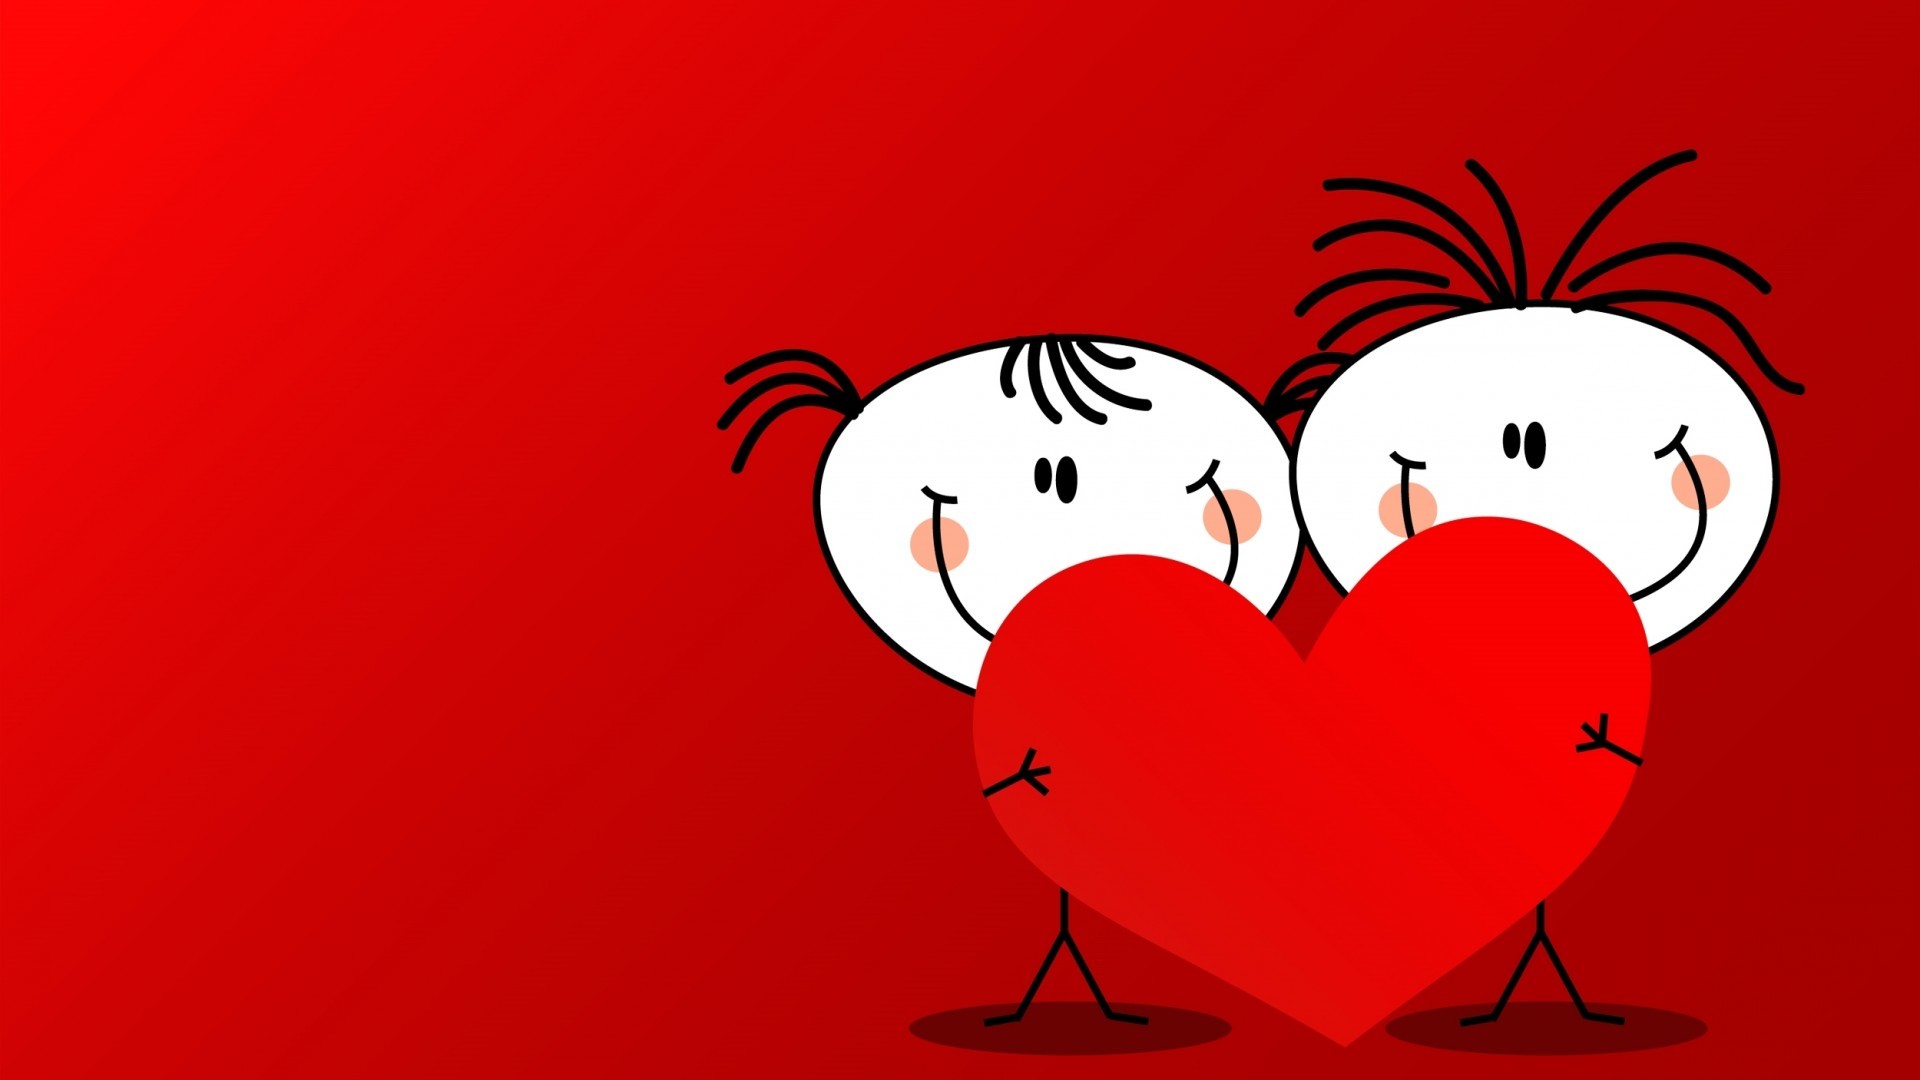 1920x1080 ... little Boy and girl hugging a heart on red background, happy valentines  day valentine couple